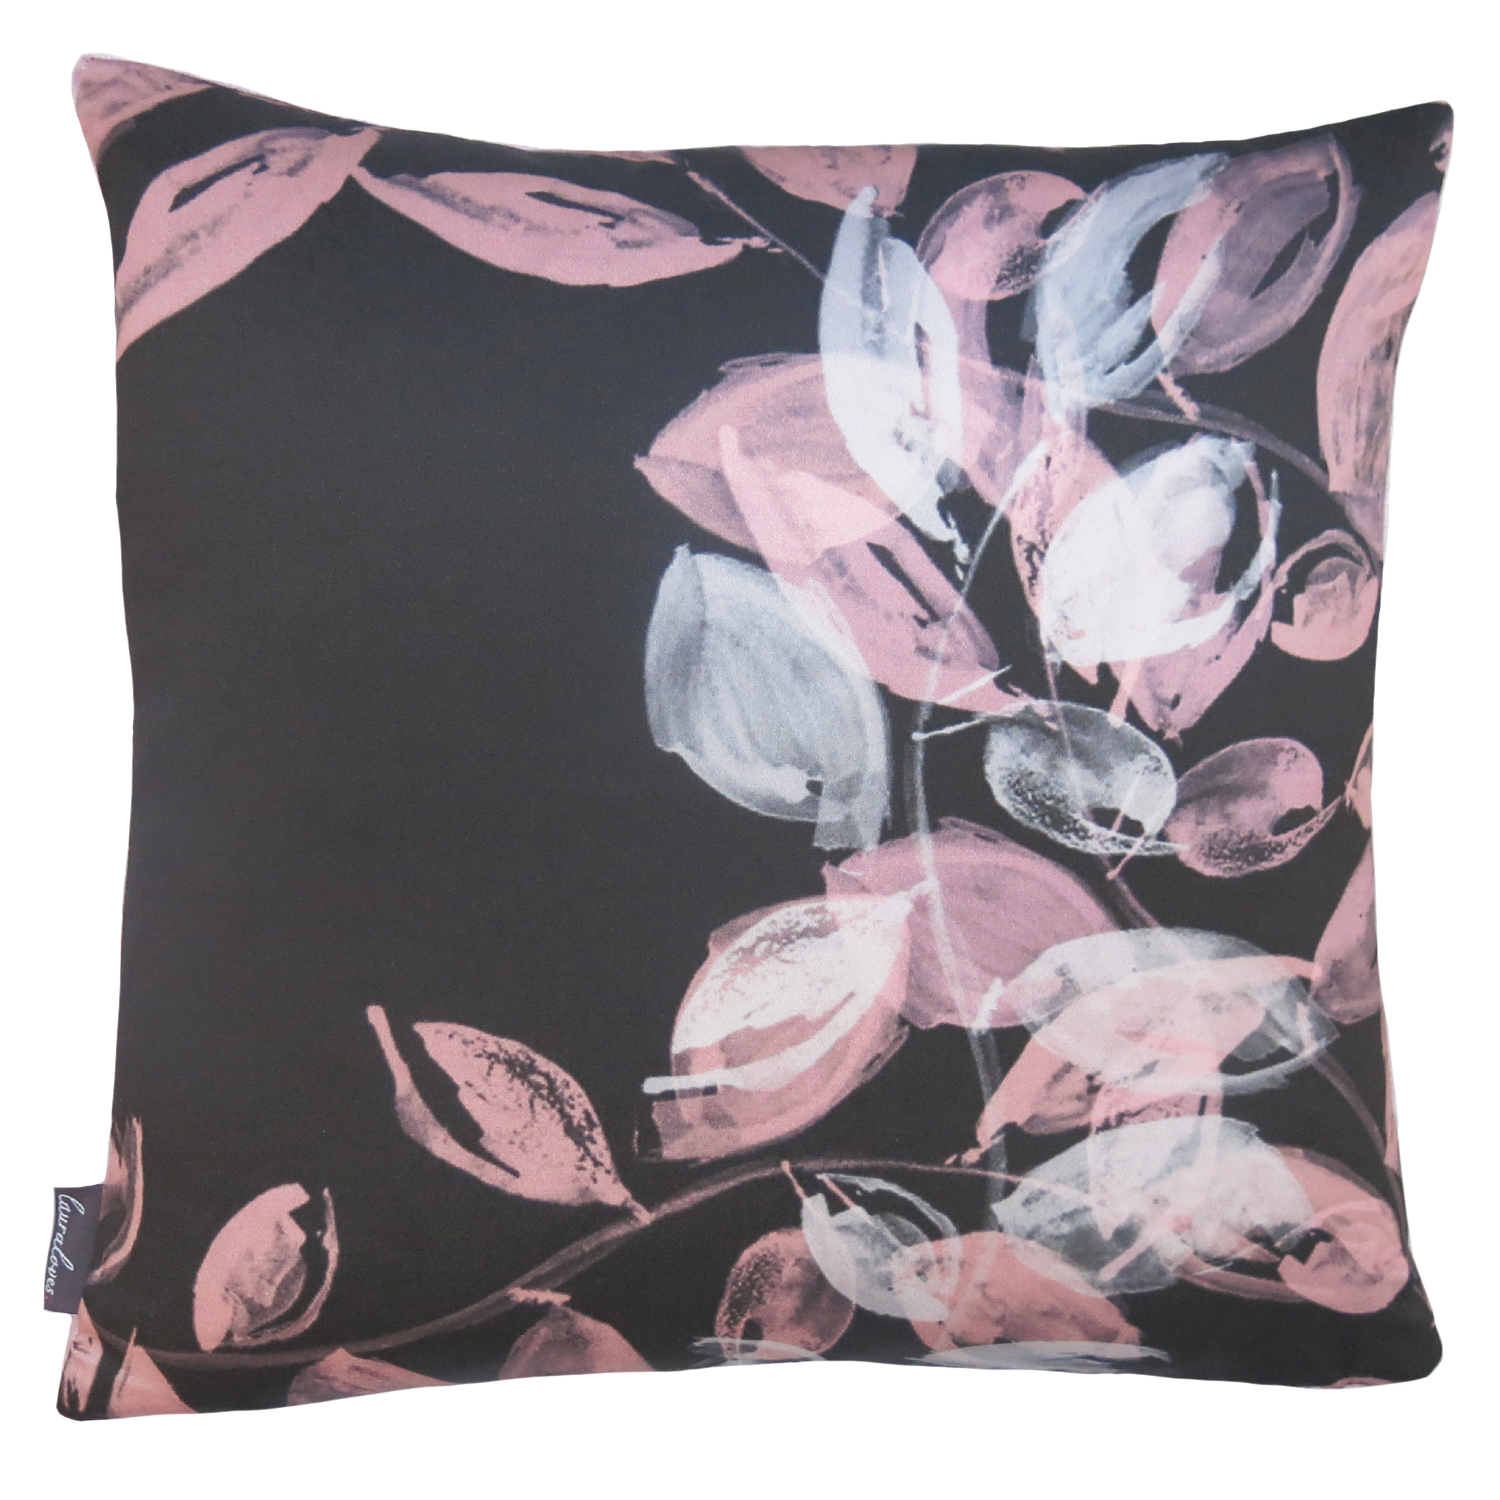 Evelyn-Leaf-Silk-Cotton-Velvet-Luxury-Cushion-hand-made-white-grey-pink-size-18%22x18%22-hand-made-for-bedroom-or-sofa-designed-by-lauraloves-design.jpg